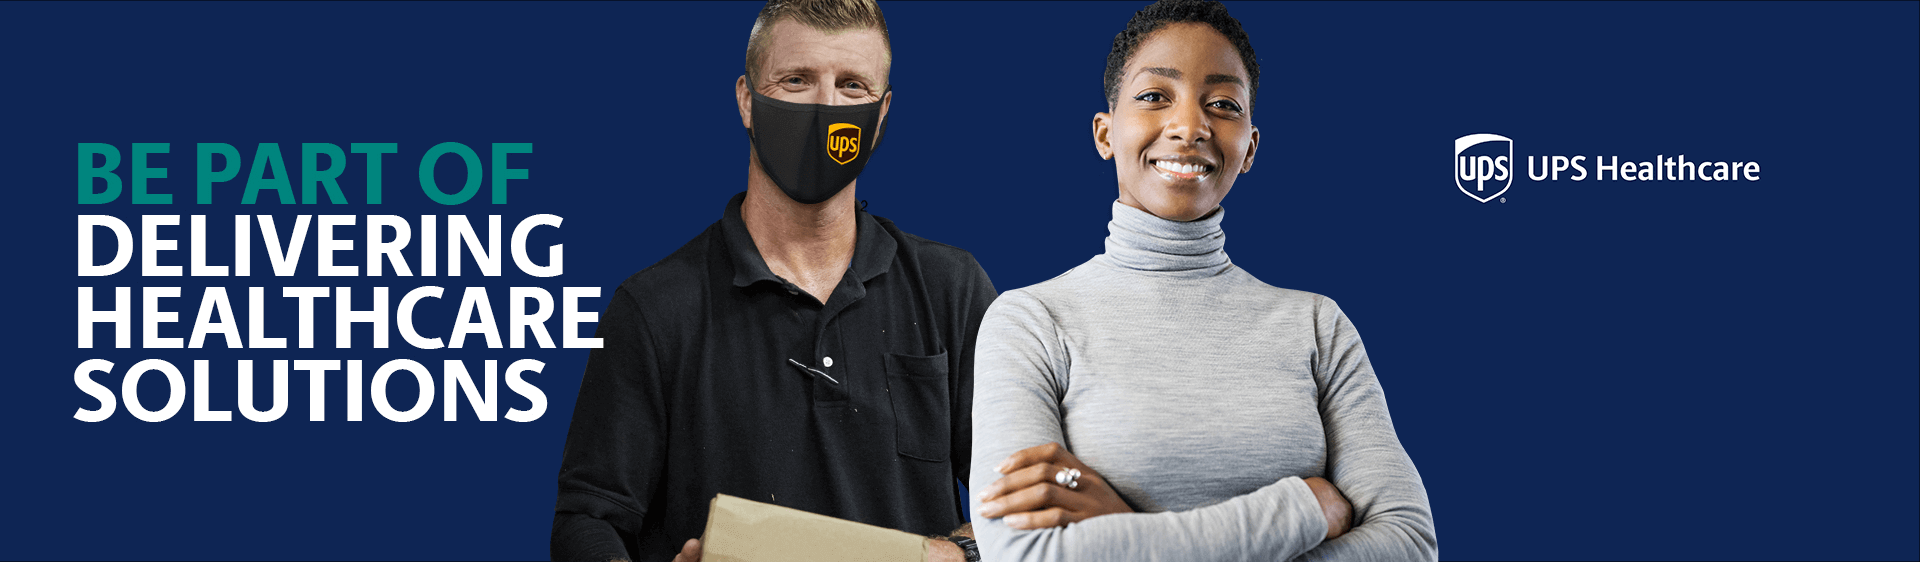 Man smiling while wearing mask and holding a box, next to a woman smiling